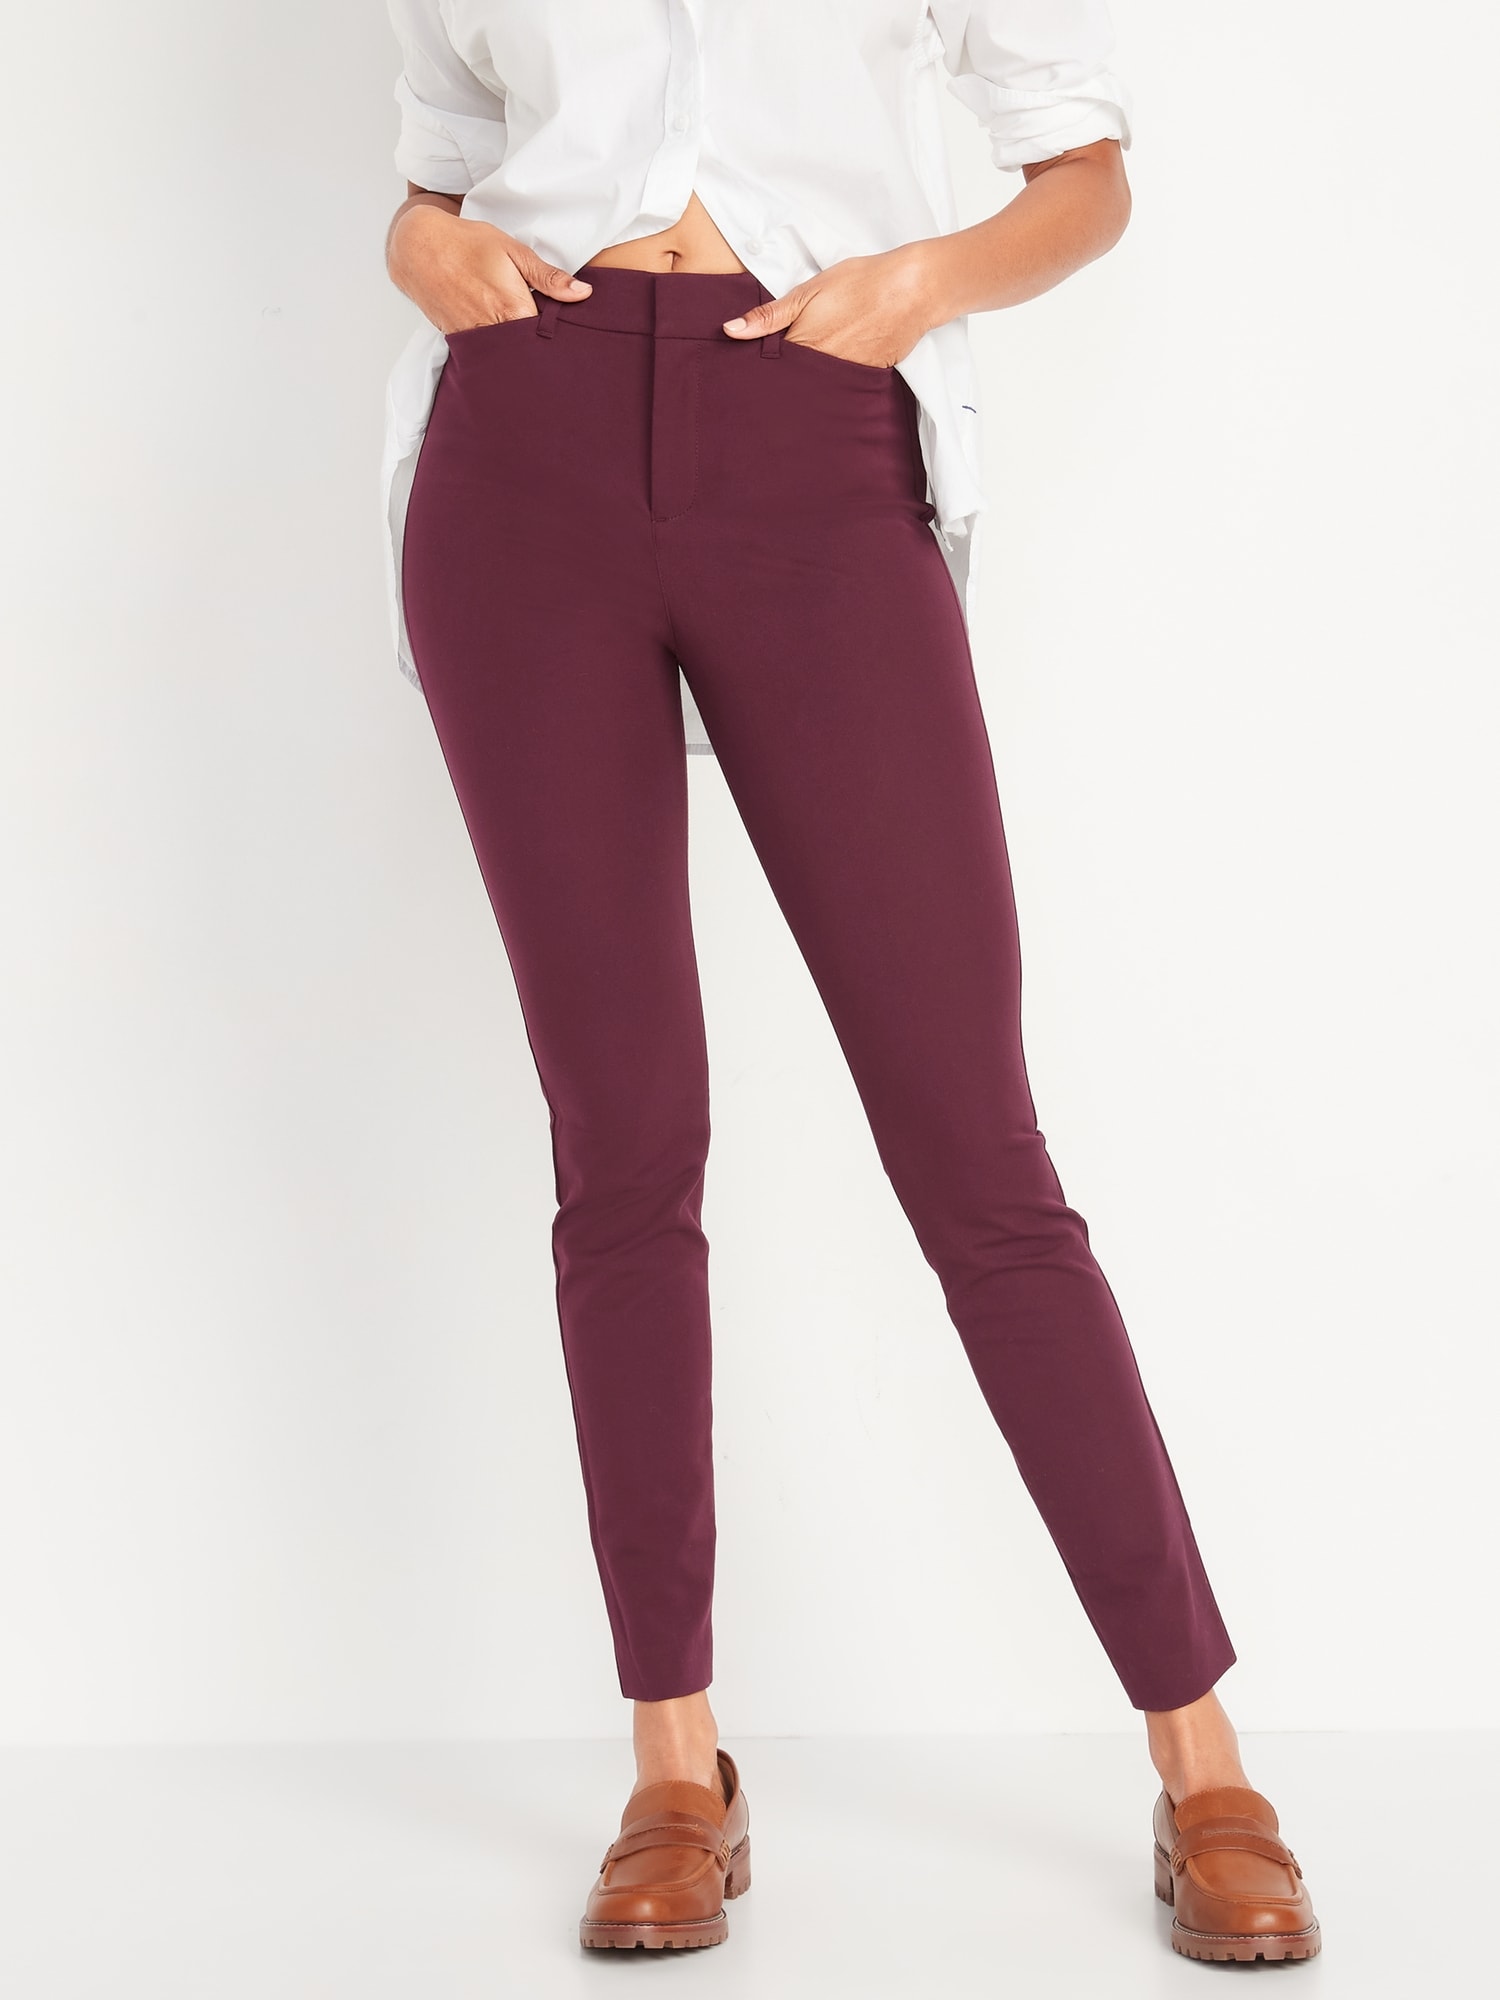 Lands End Women Mid Rise Pull On Chino Ankle Pants BURGUNDY 6P $67.95